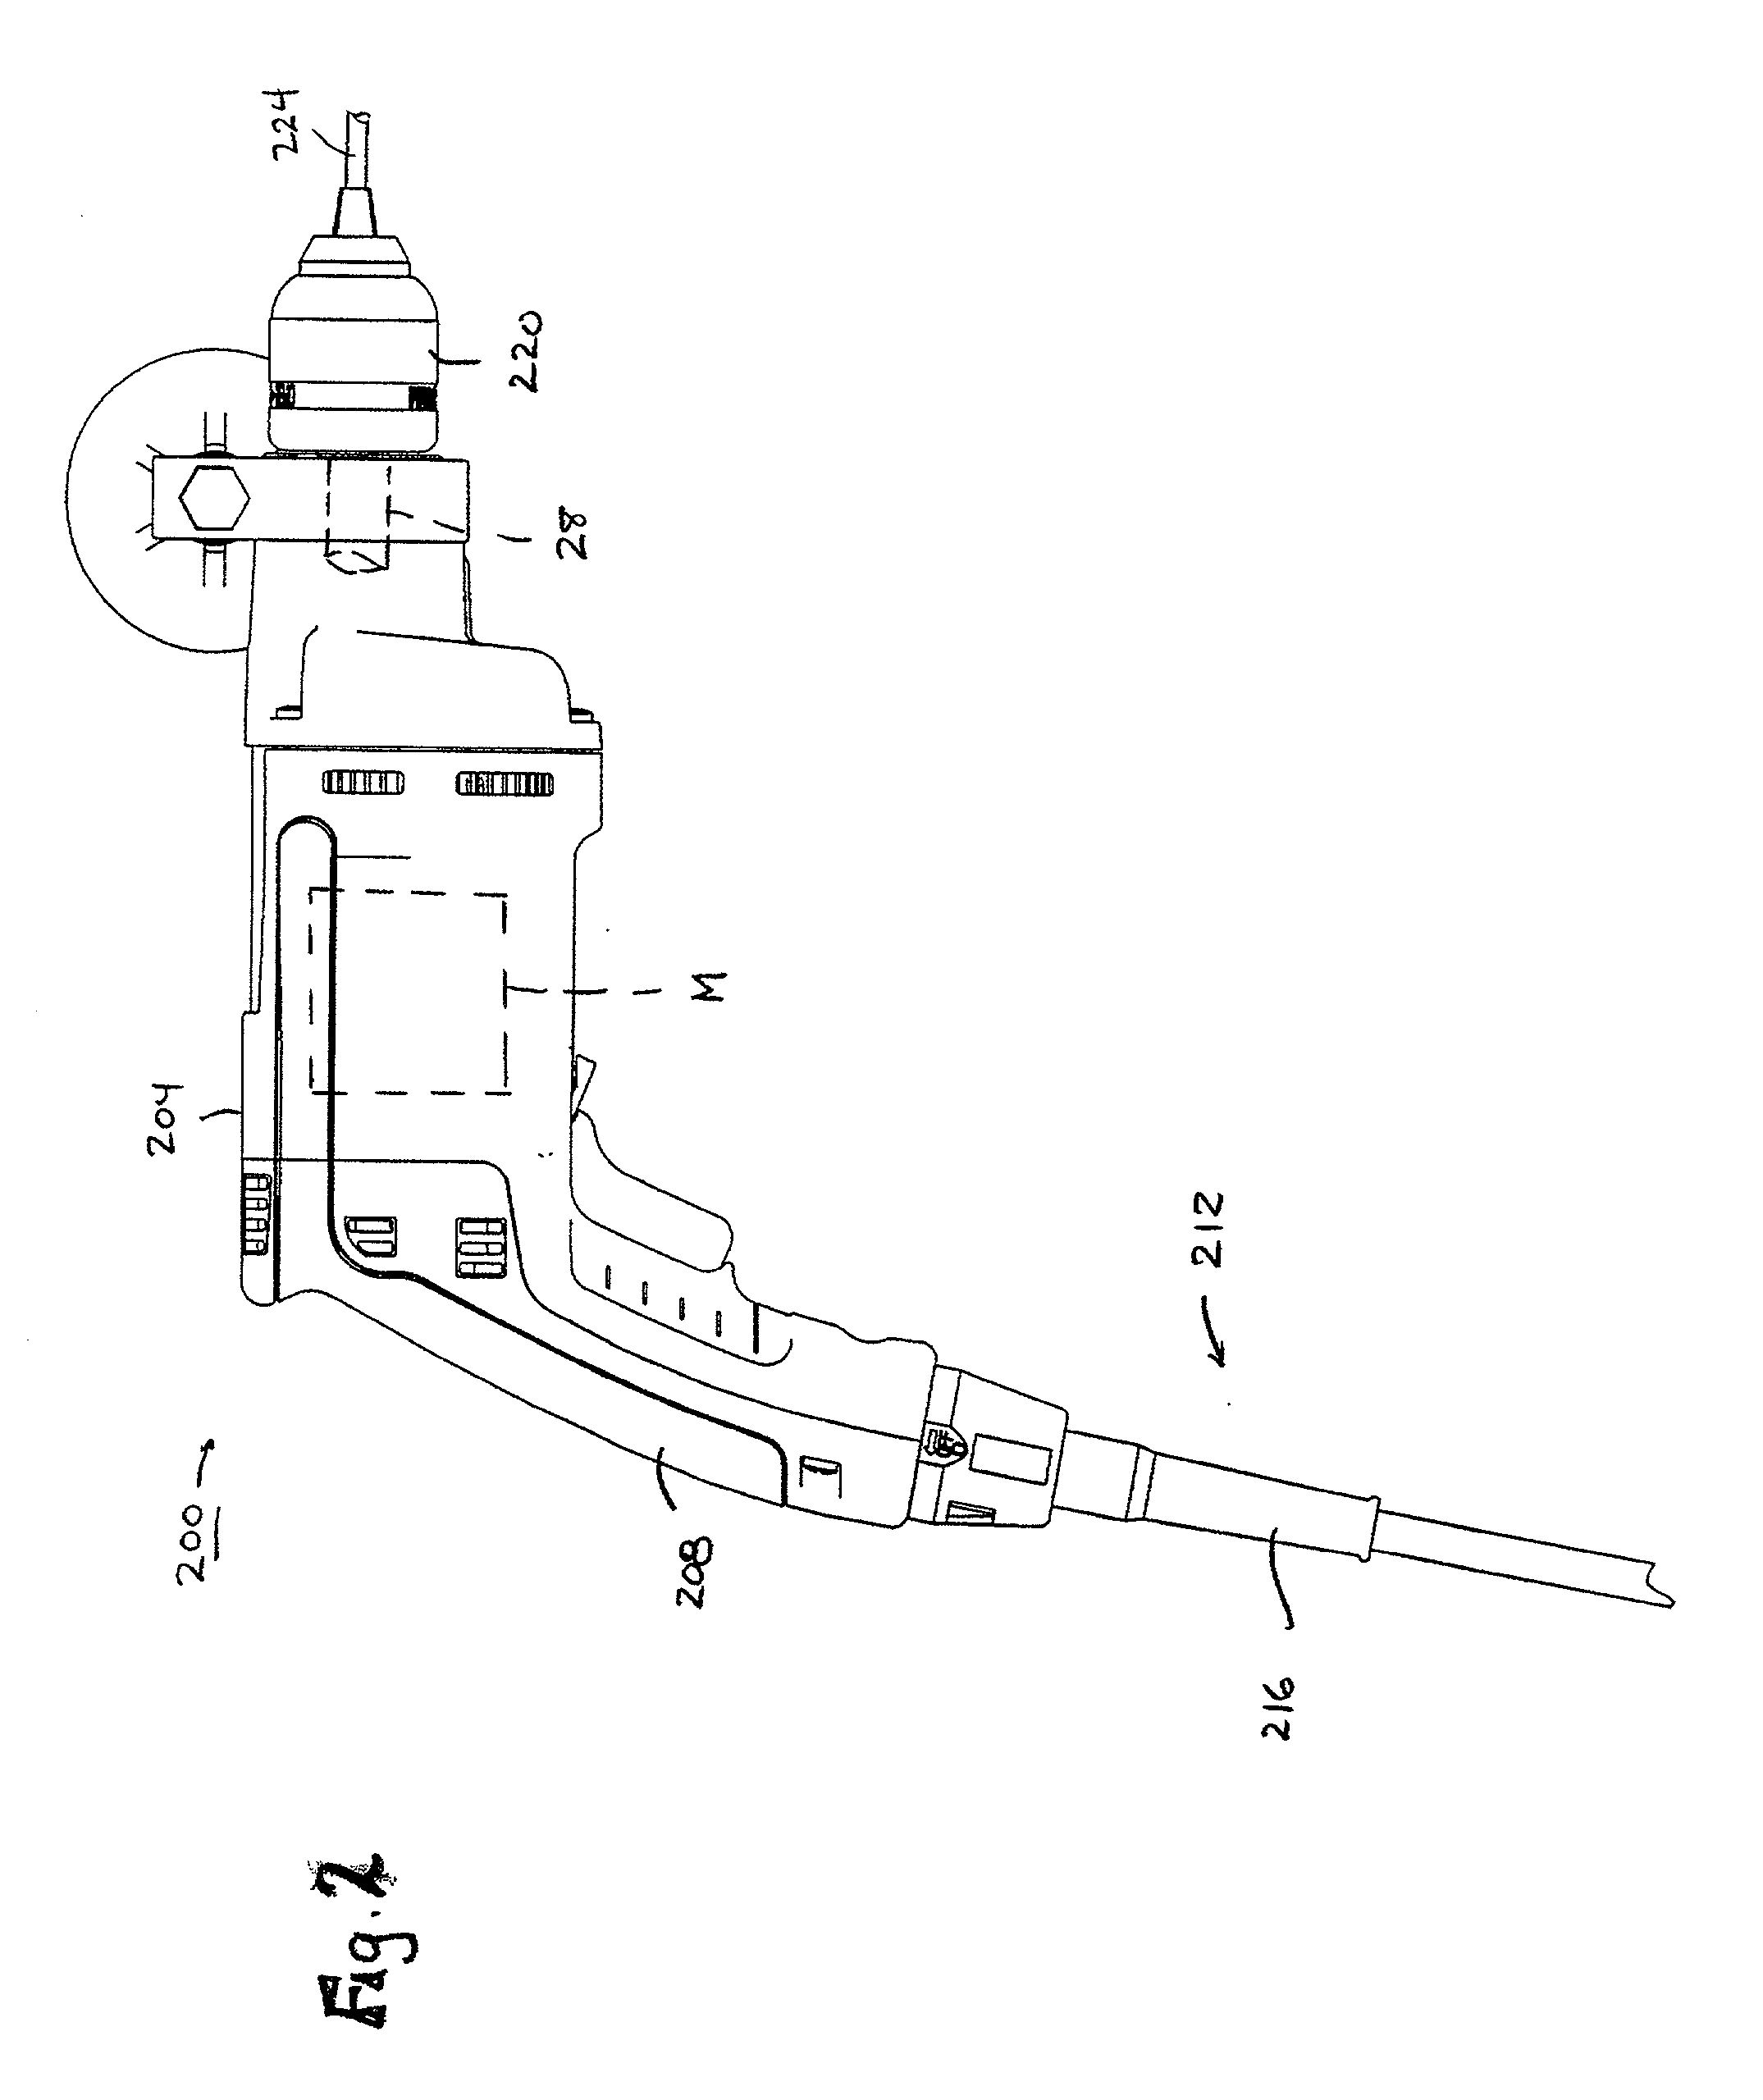 Power tool and spindle lock system